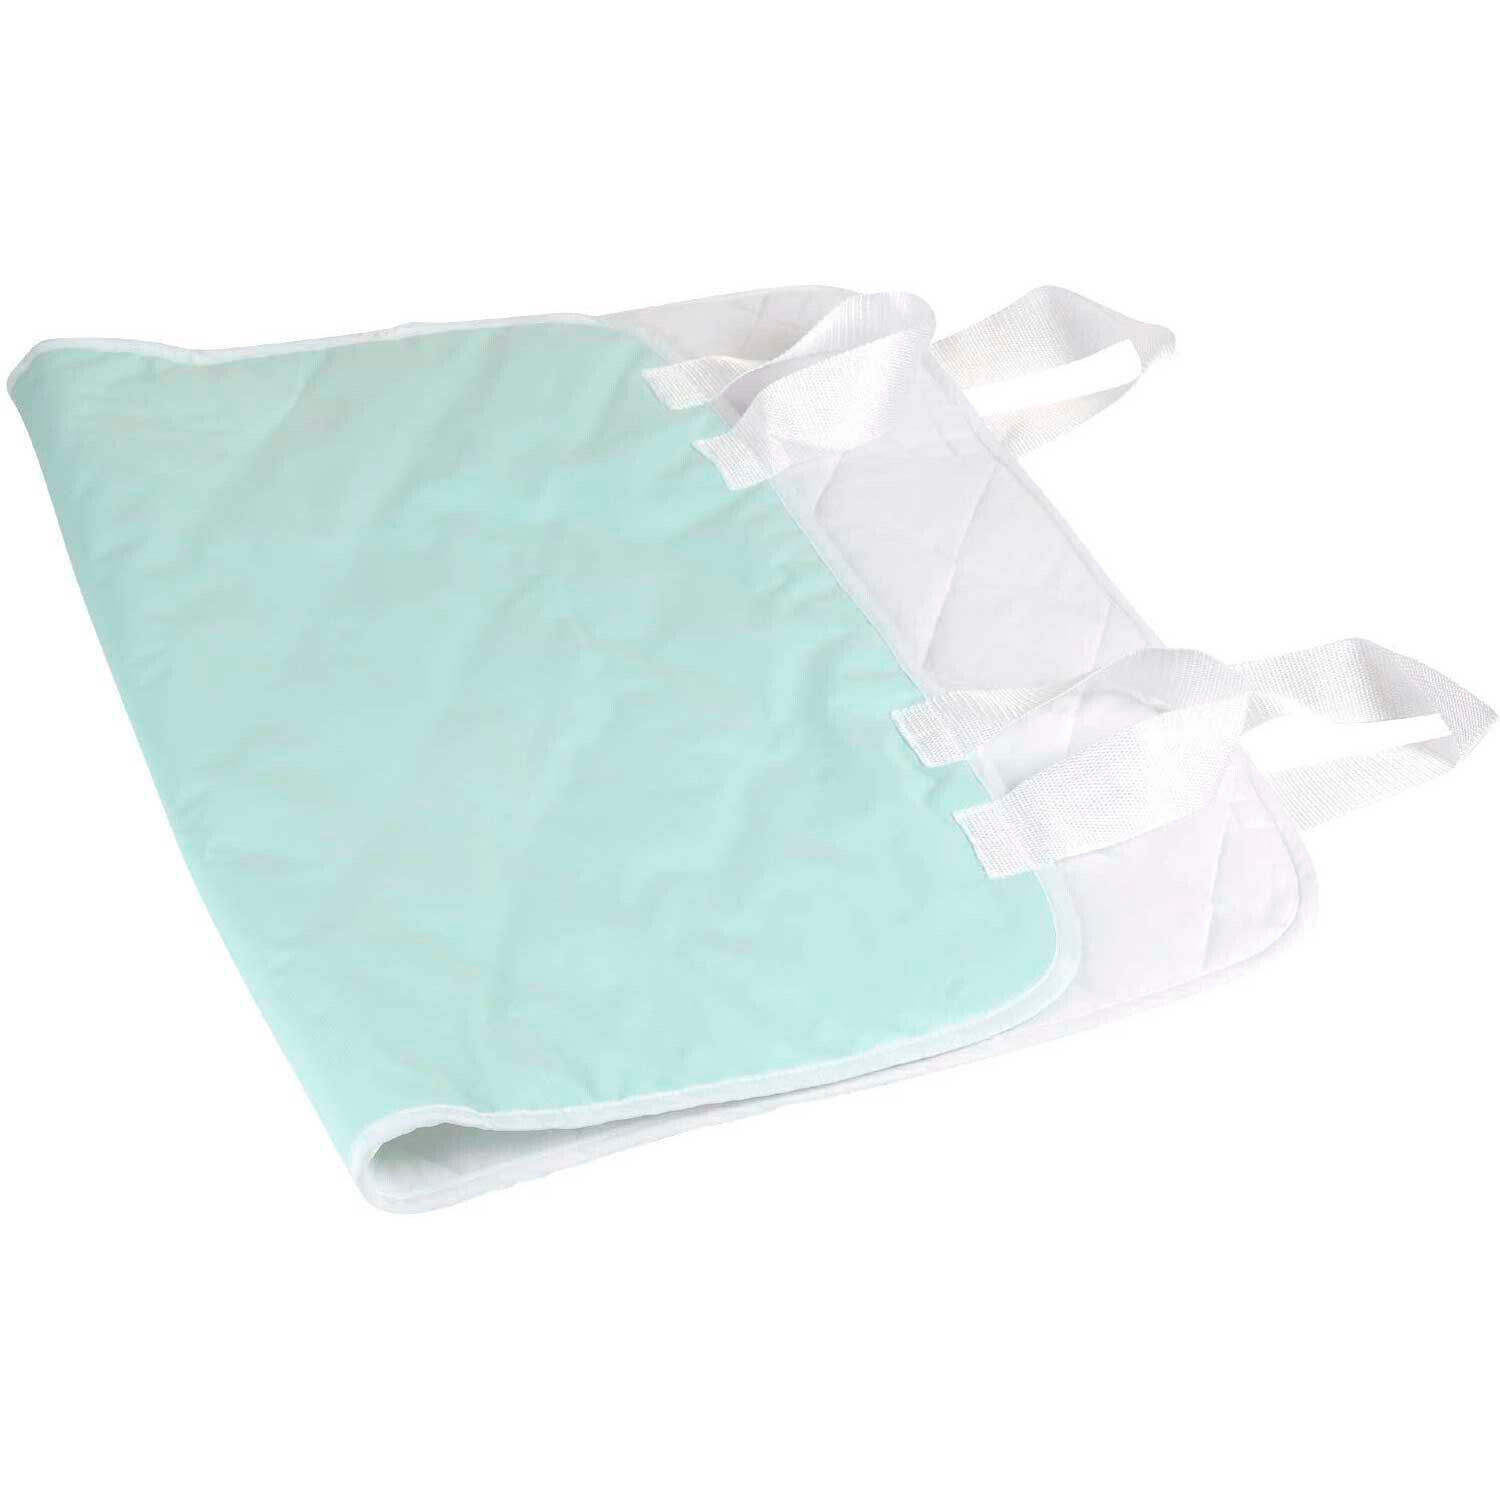 New Reusable Underpad 4 ply Washable Quilted Slide Sheet 28 x 36 Straps - $14.68